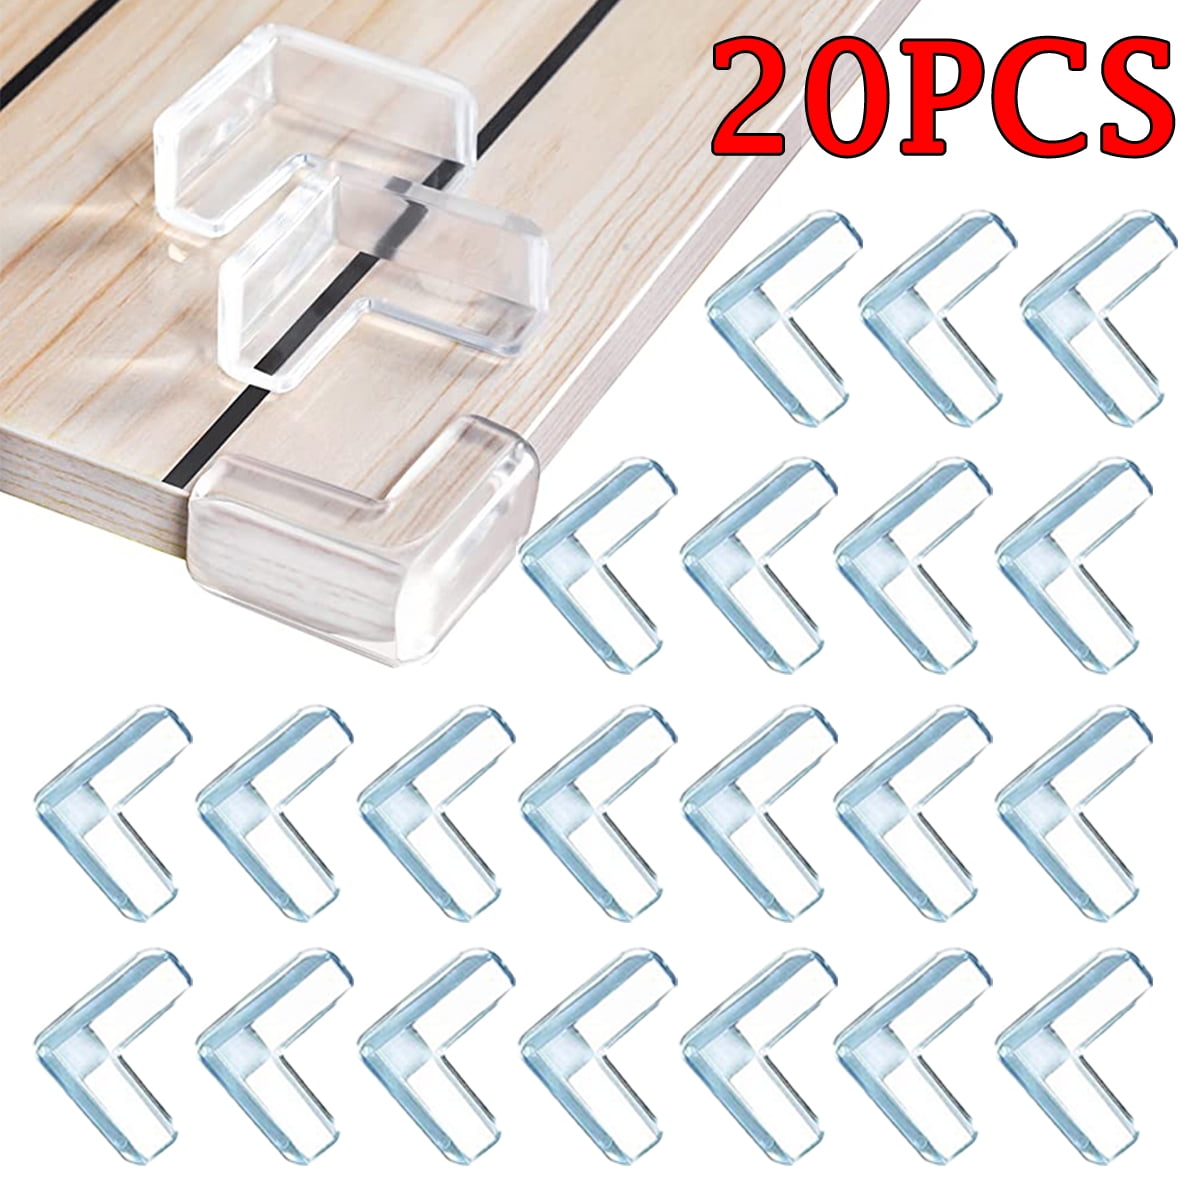 1 Roll Silicone Clear Table Corner Protector Cushion Edge Strip Baby Safety Tool 